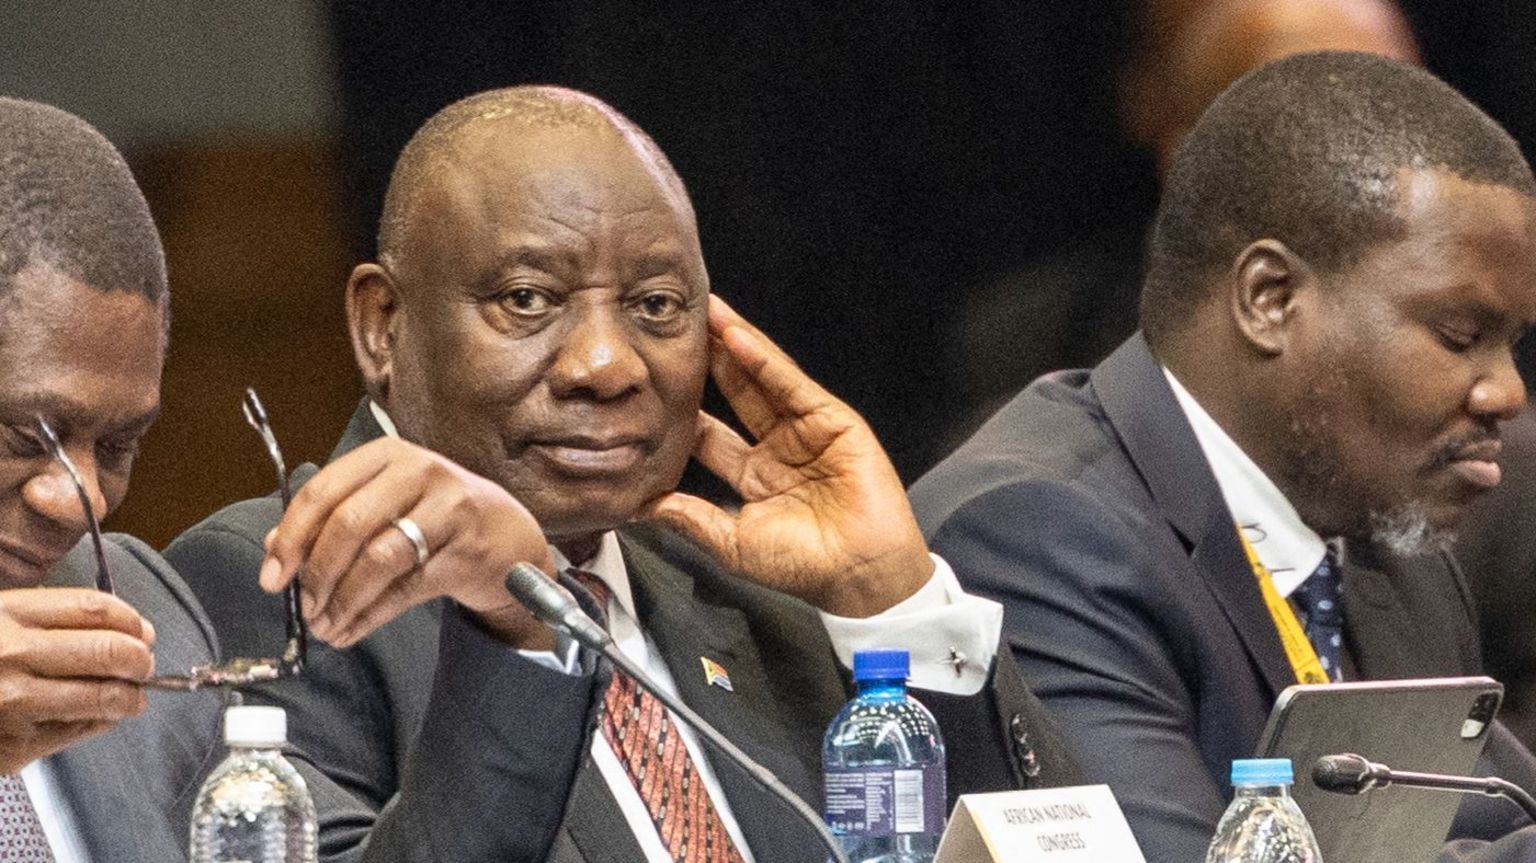 Deputy president of the African National Congress (ANC) Paul Mashatile (L) and president of the African National Congress (ANC) and South African President Cyril Ramaphosa (2nd L) attend the first sitting of the New South African Parliament in Cape Town on  14 June.